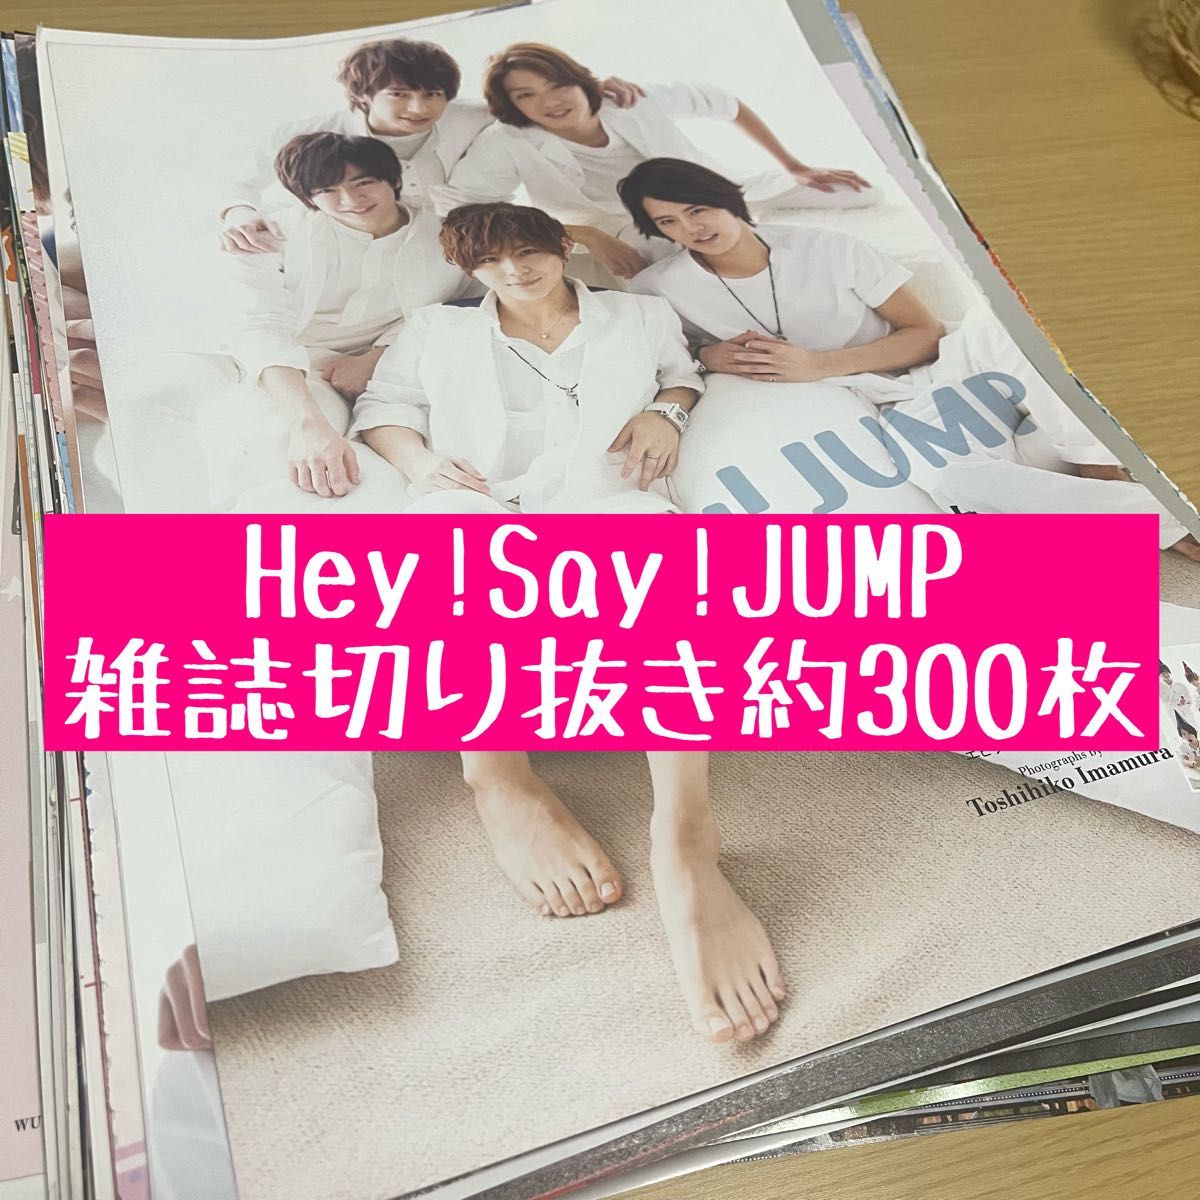 Hey!Say!JUMP 雑誌切り抜き約300枚 